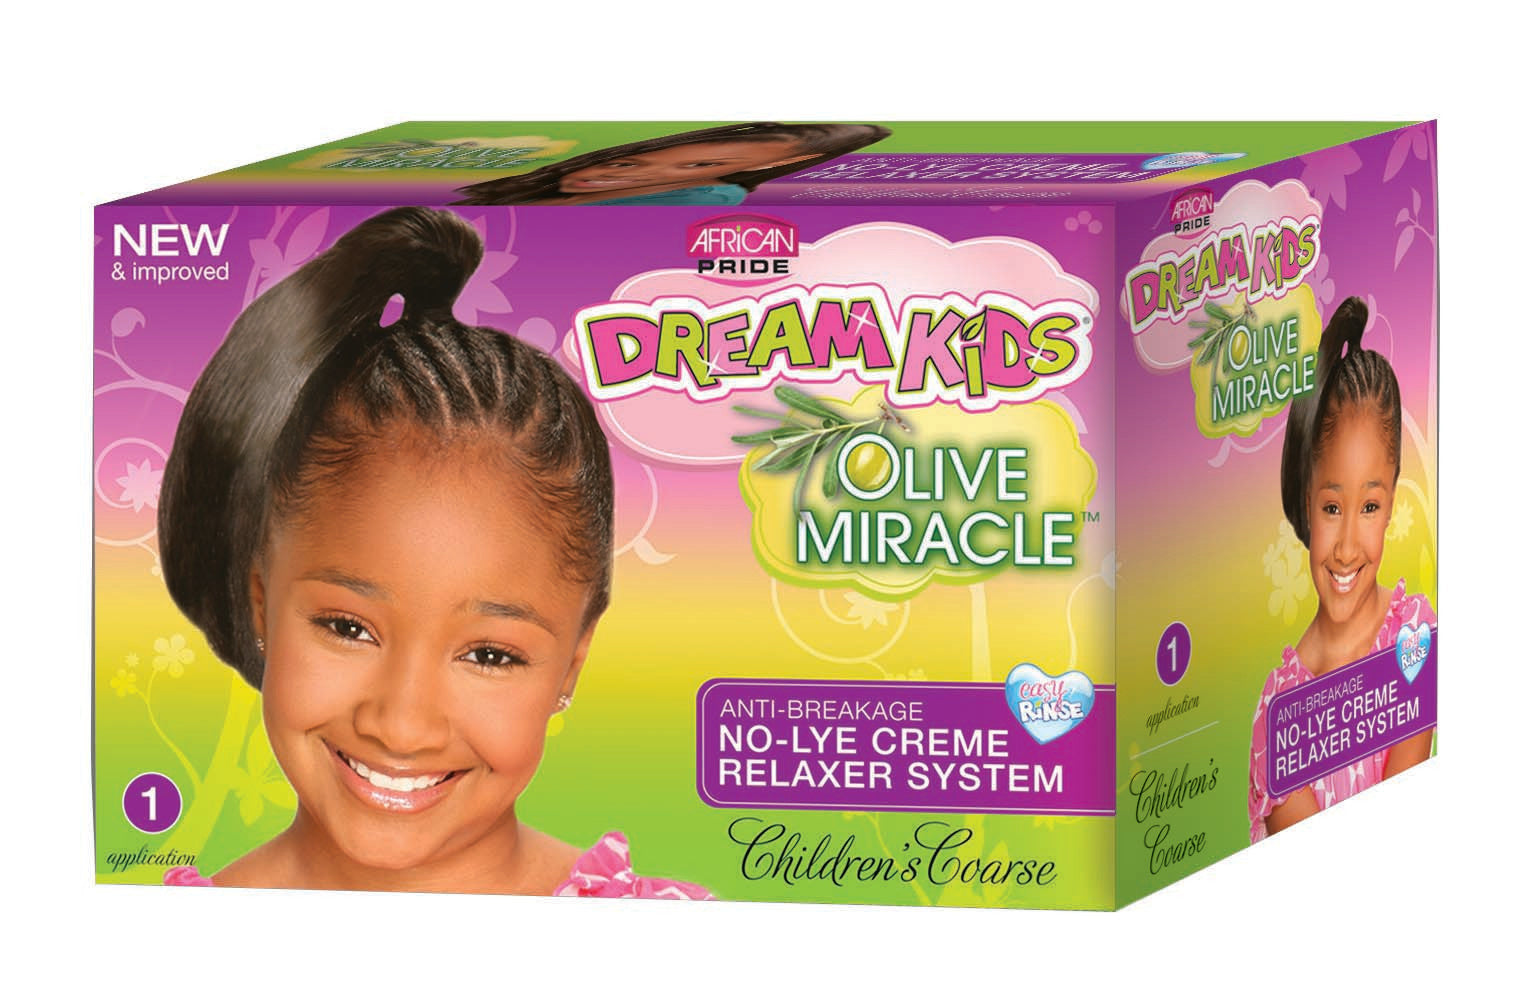 AFRICAN PRIDE Dream Kids Olive Miracle Relaxer Kit SUP